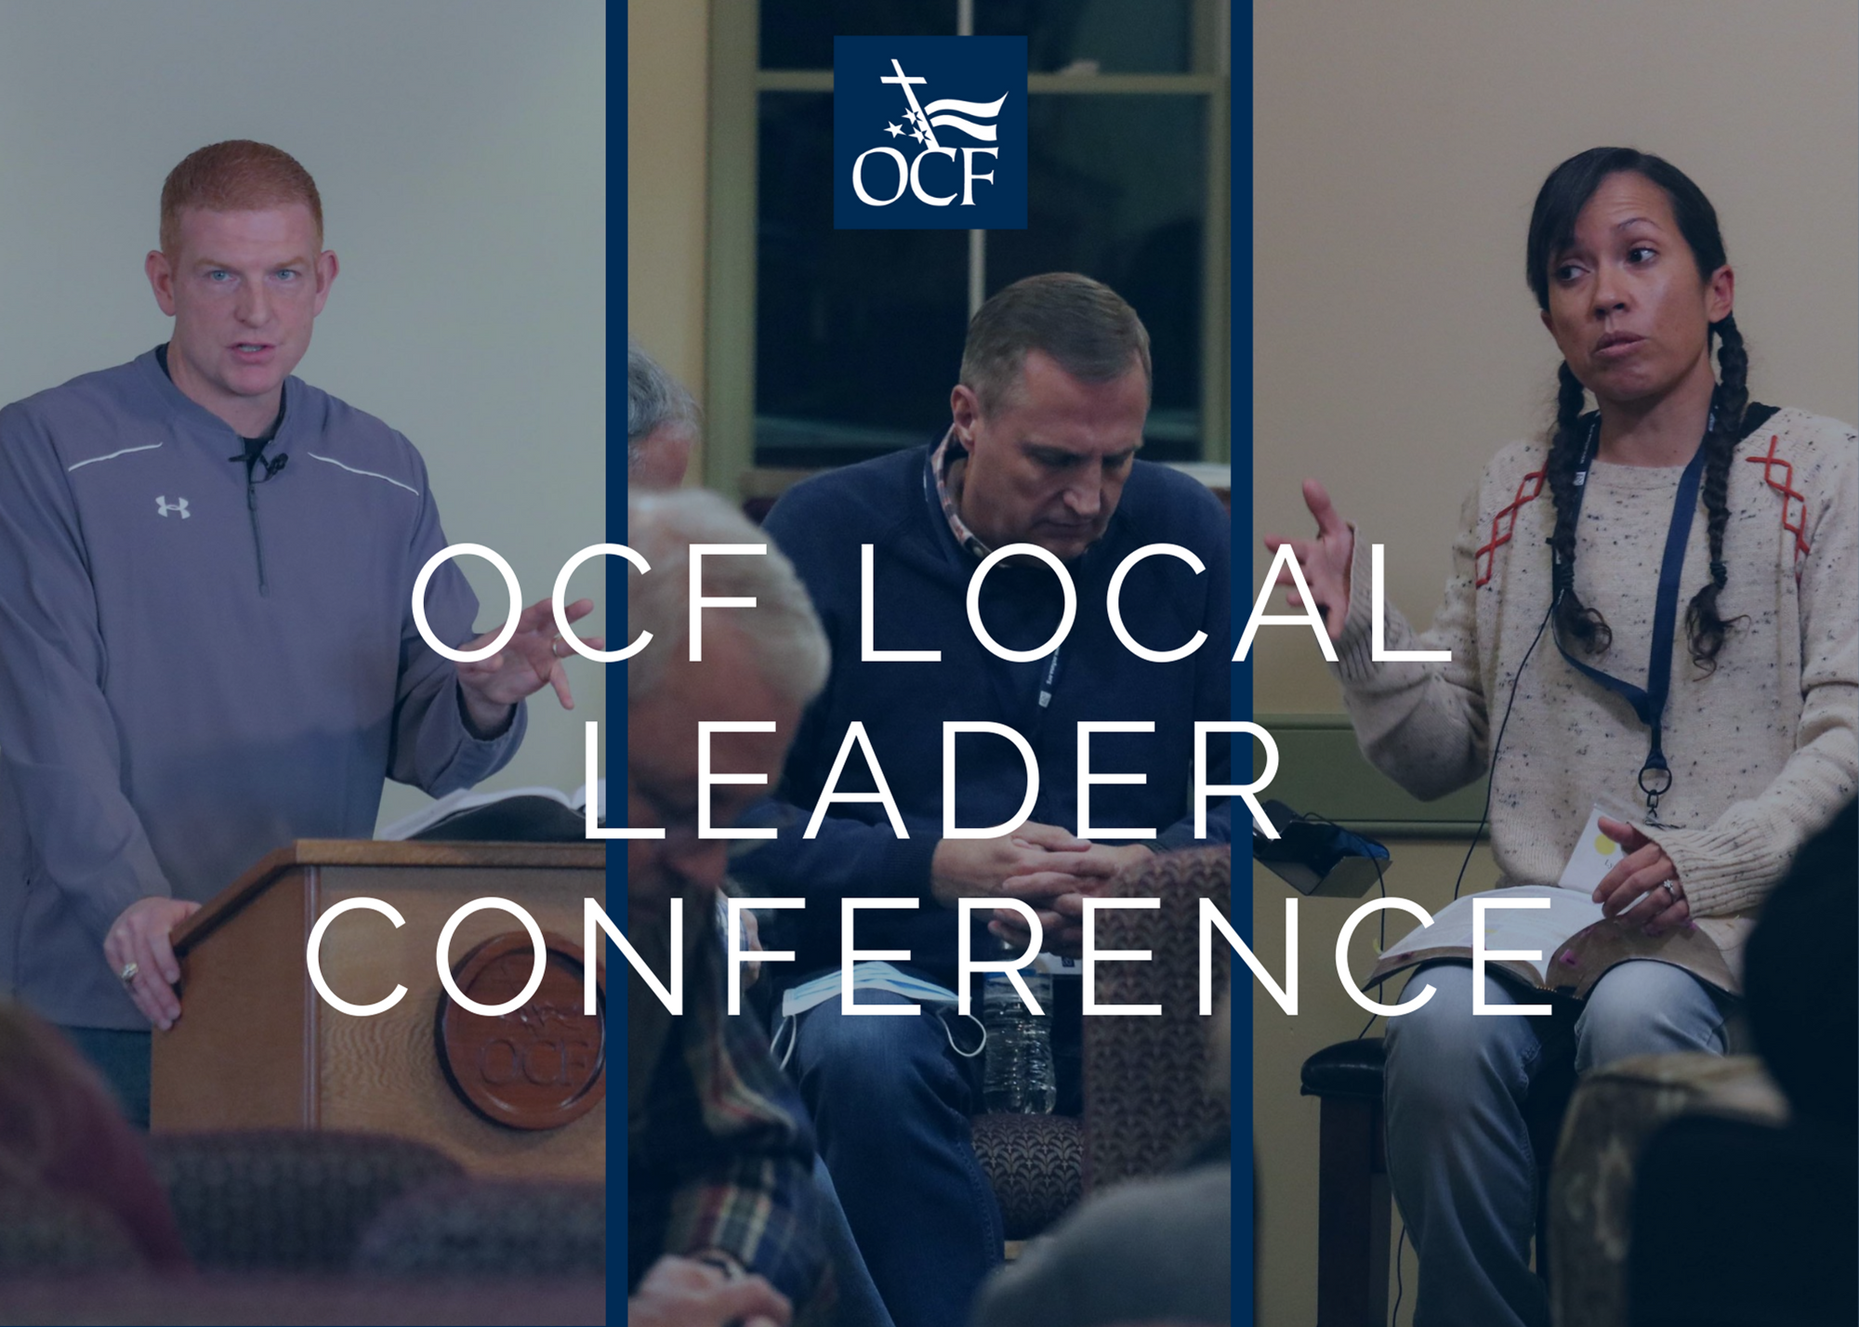 OCF Local Leader Conference at White Sulphur Springs